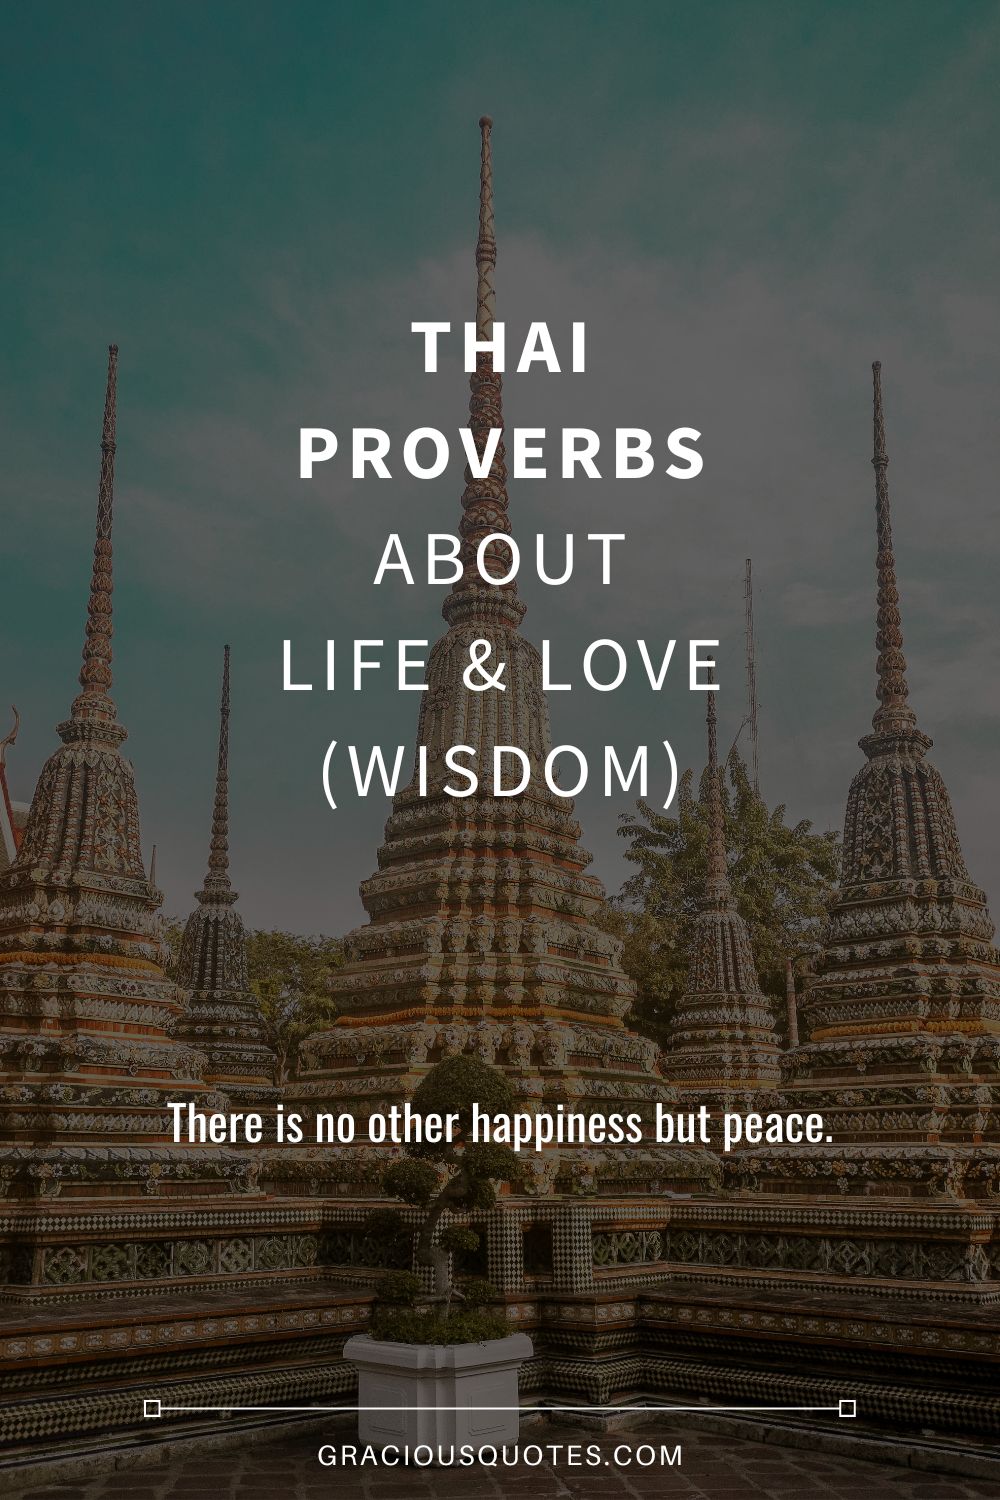 Thai Proverbs About Life & Love (WISDOM) - Gracious Quotes